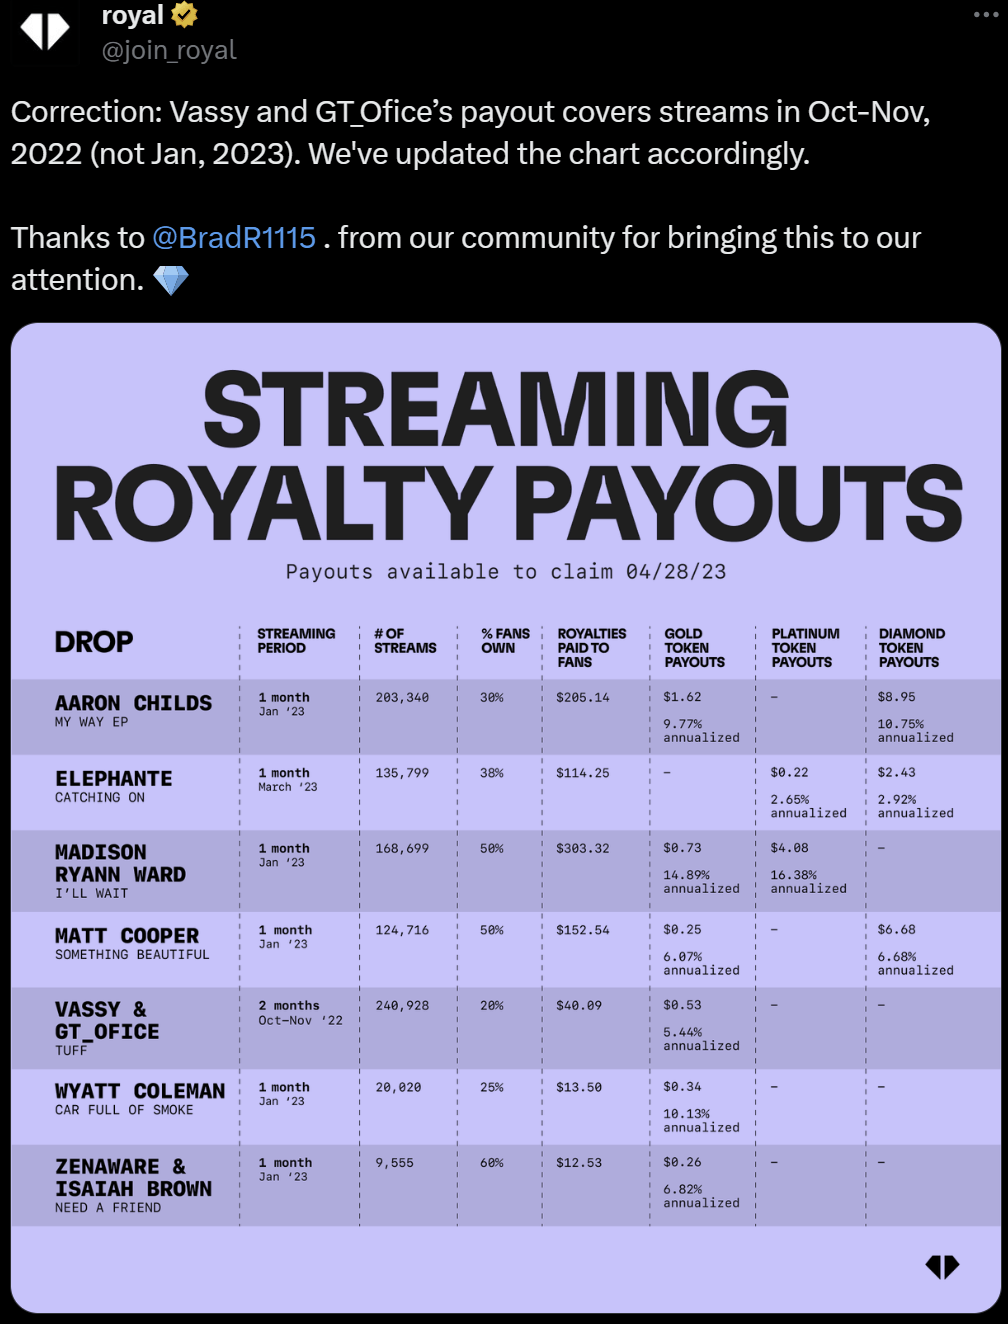 Depicts a tweet from Royal announcing recent streaming royalty payouts.